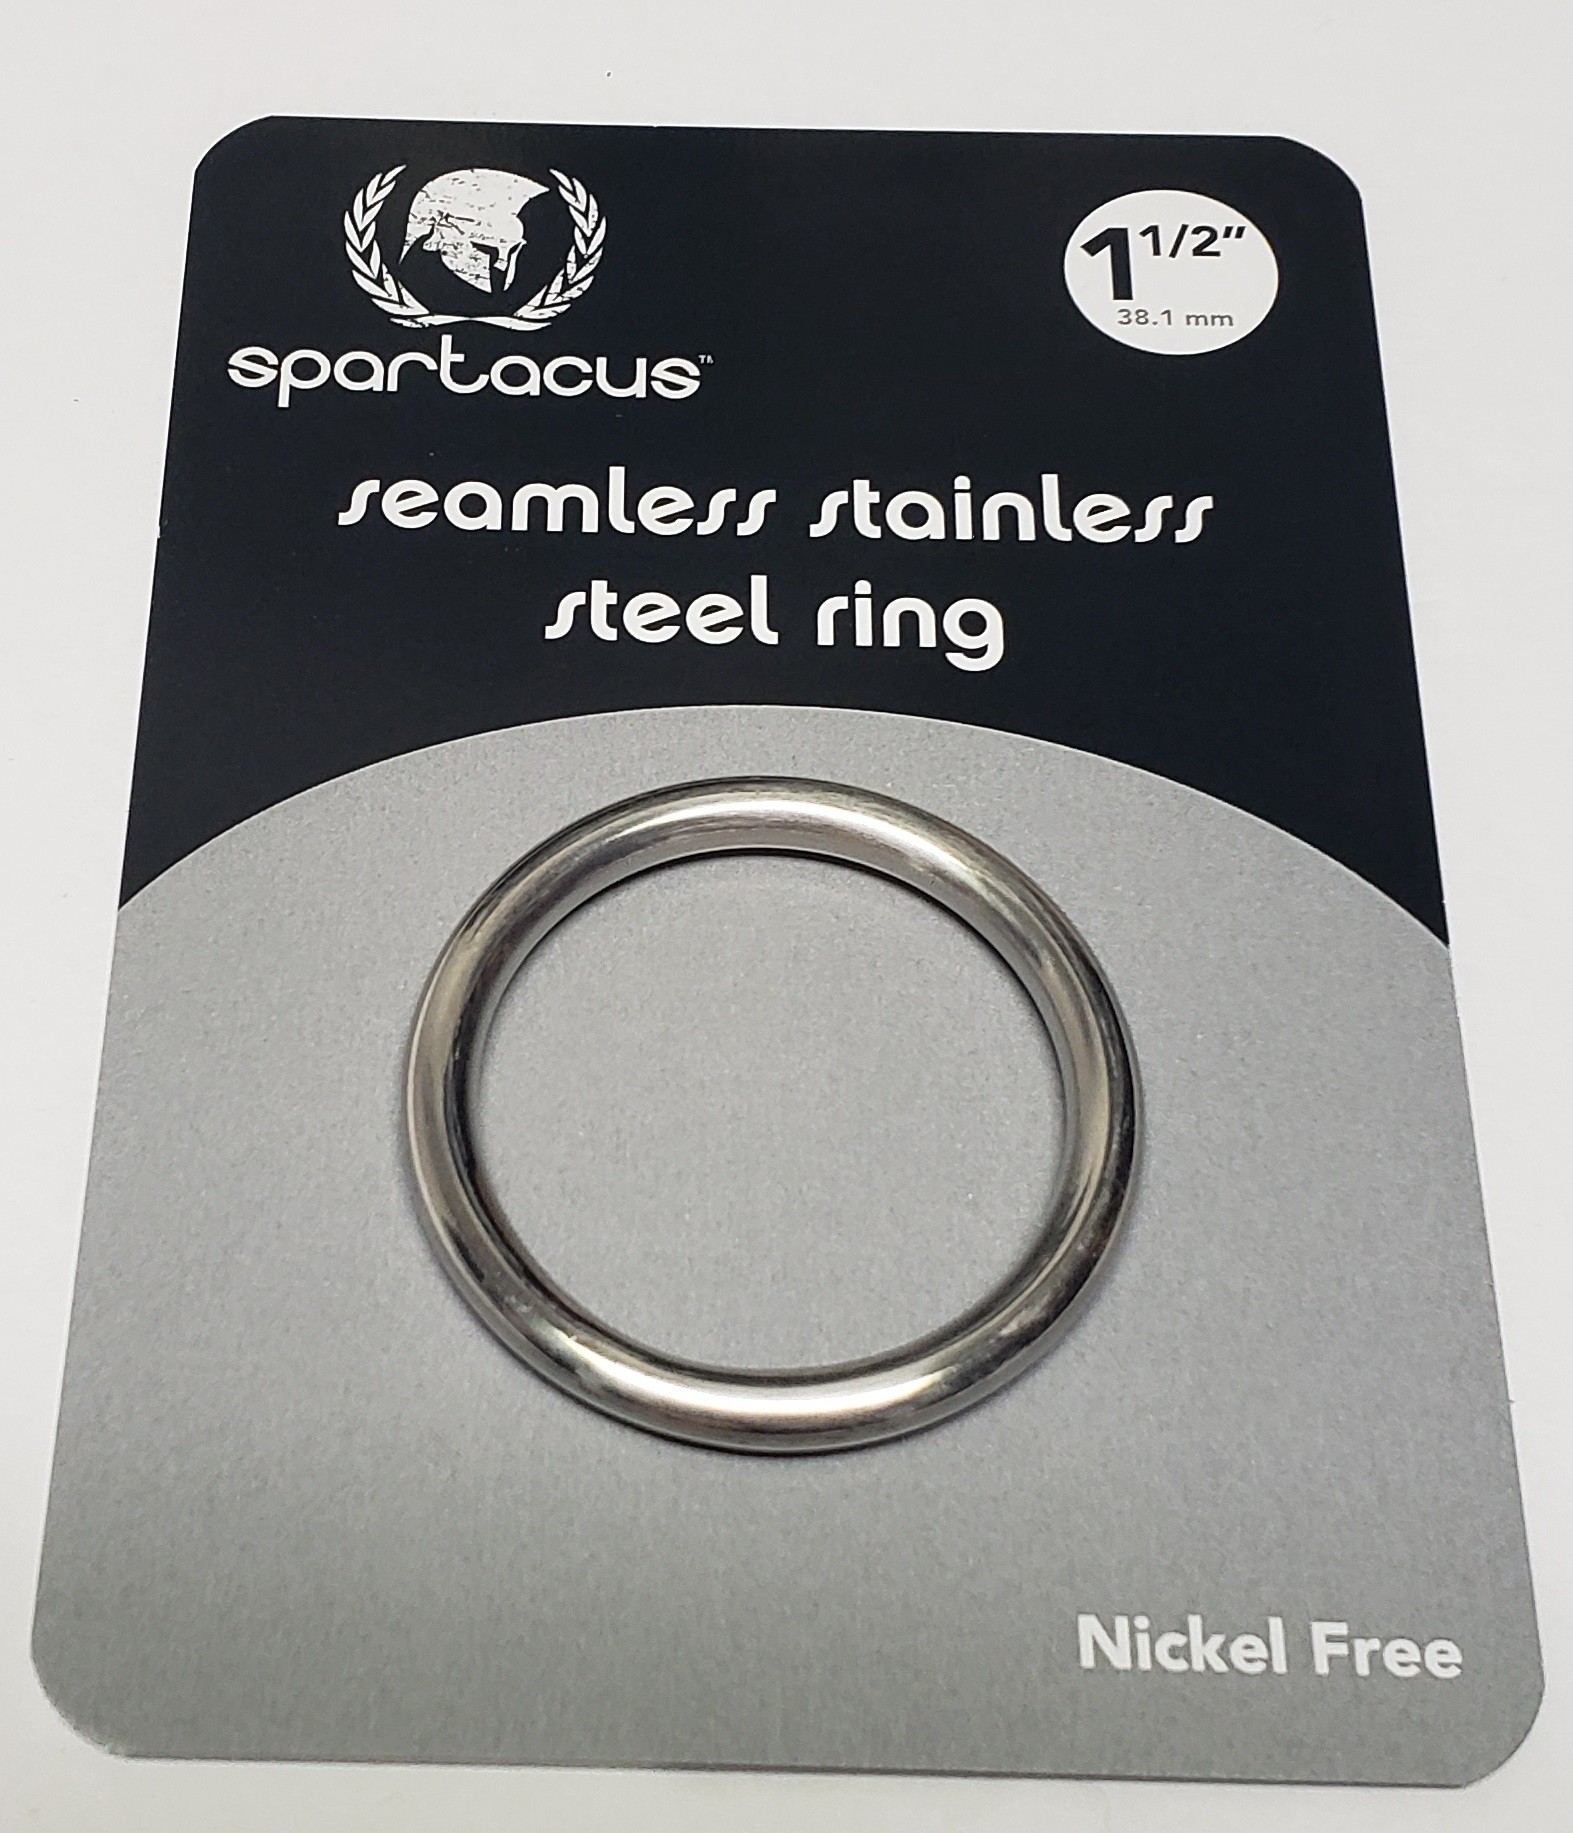 1-1/2" SEAMLESS STAINLESS STEEL C-RING